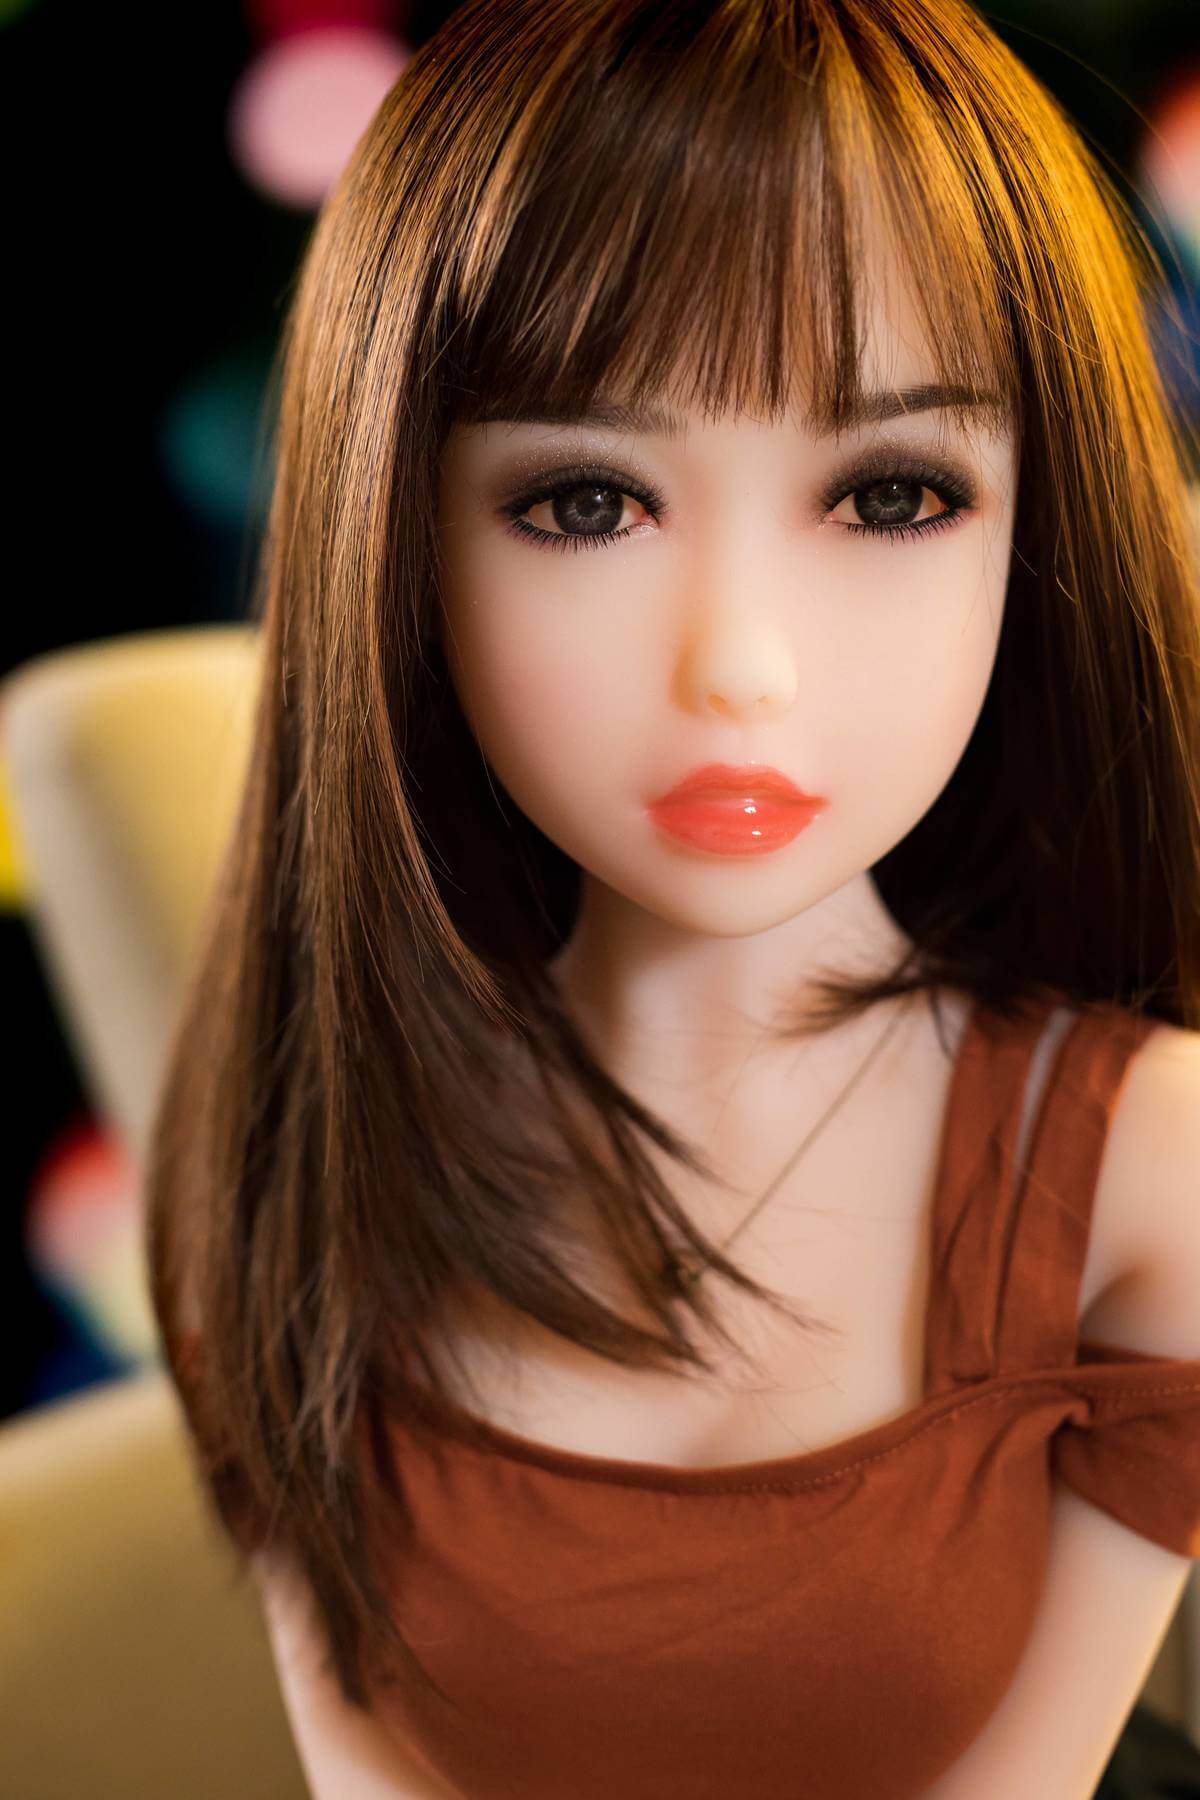 flat chested sex doll_66_4